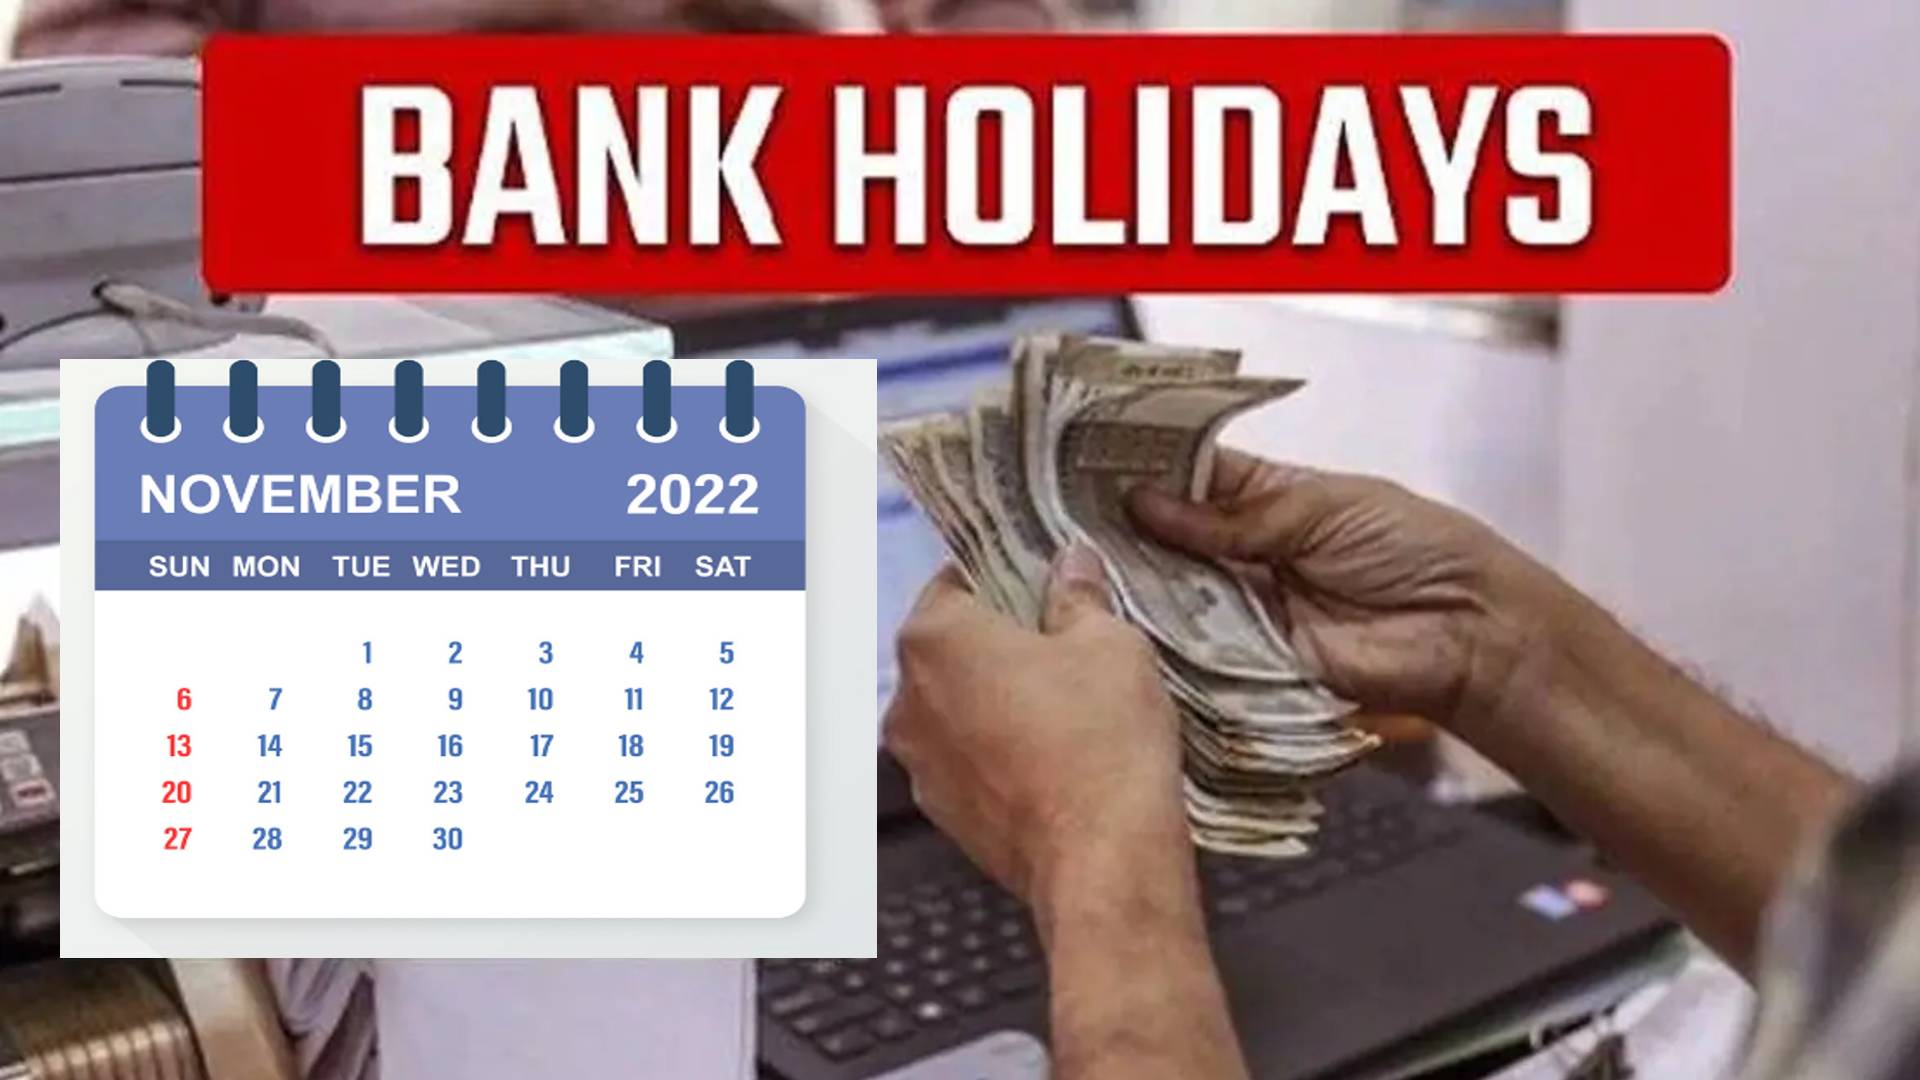 Bank Holidays November 2022 banks will be closed 10 days in next month